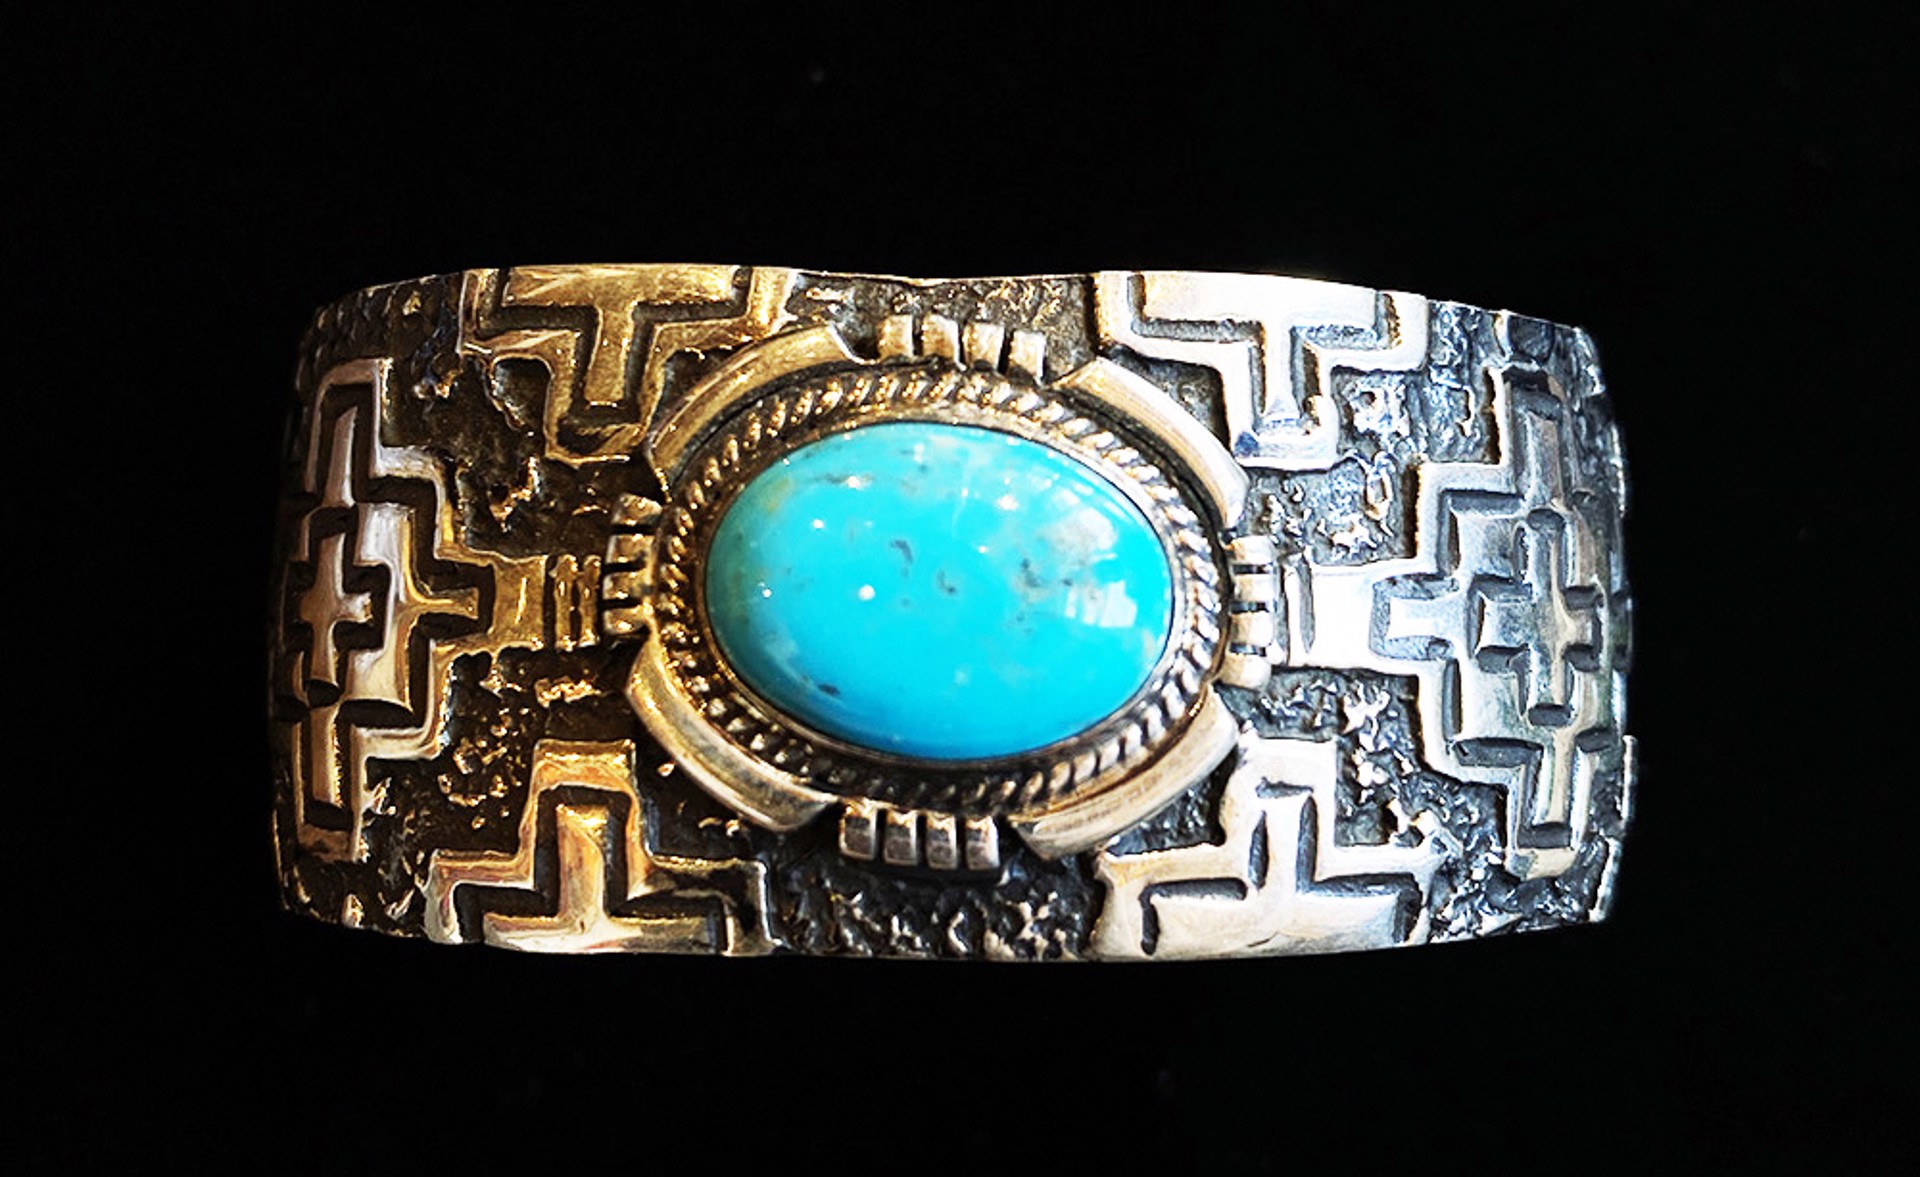 Turquoise Cuff by Artist Unknown